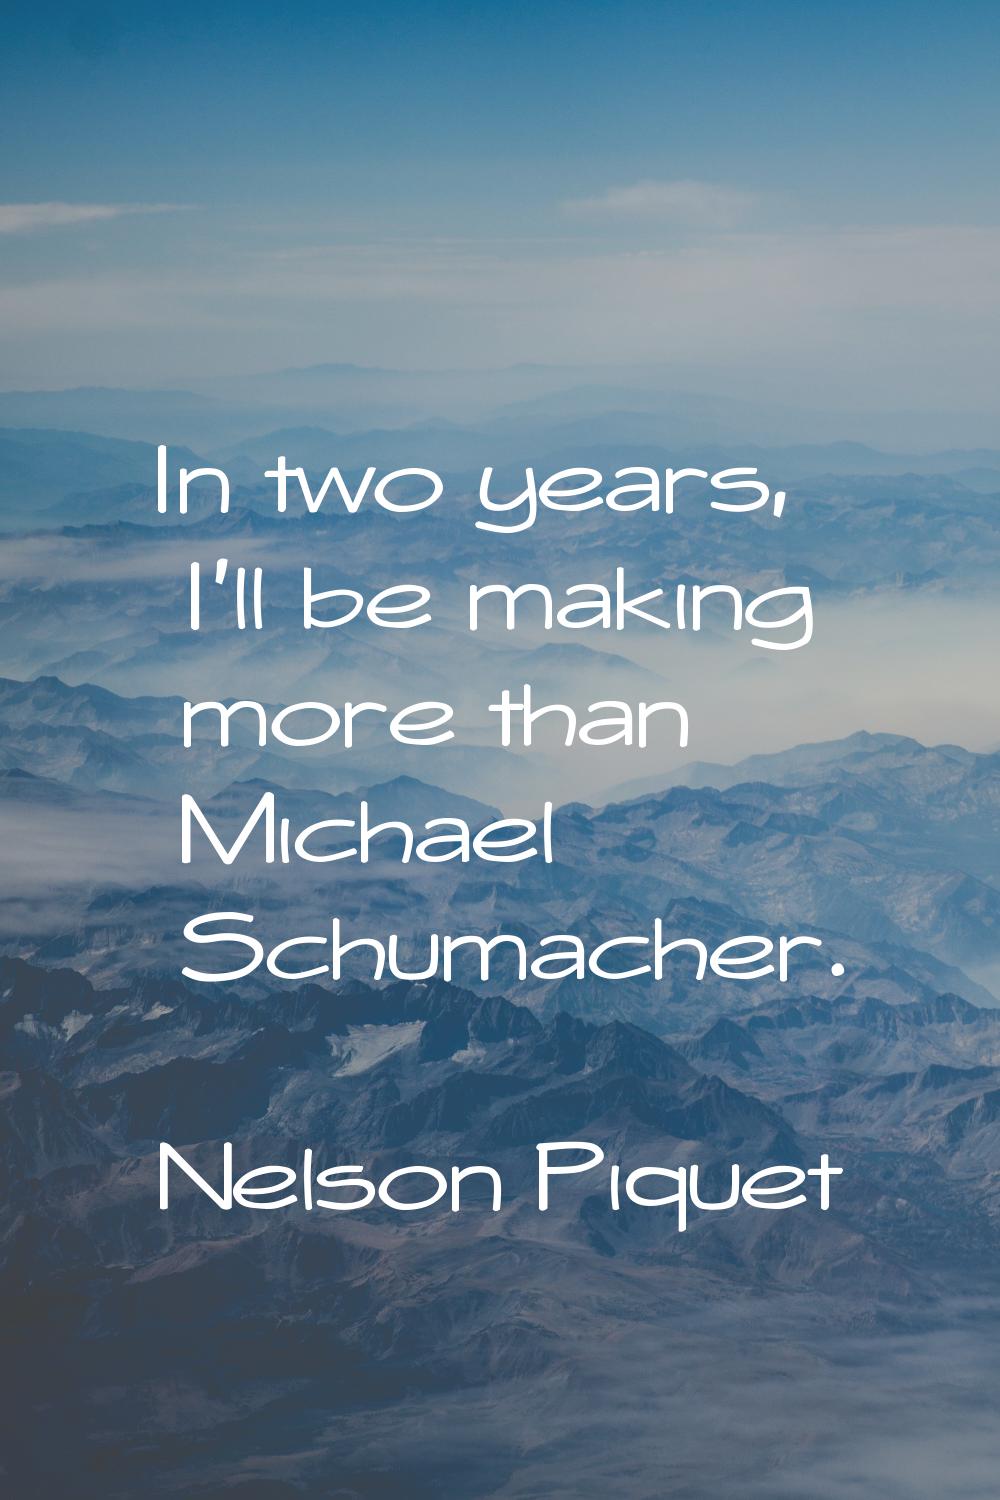 In two years, I'll be making more than Michael Schumacher.